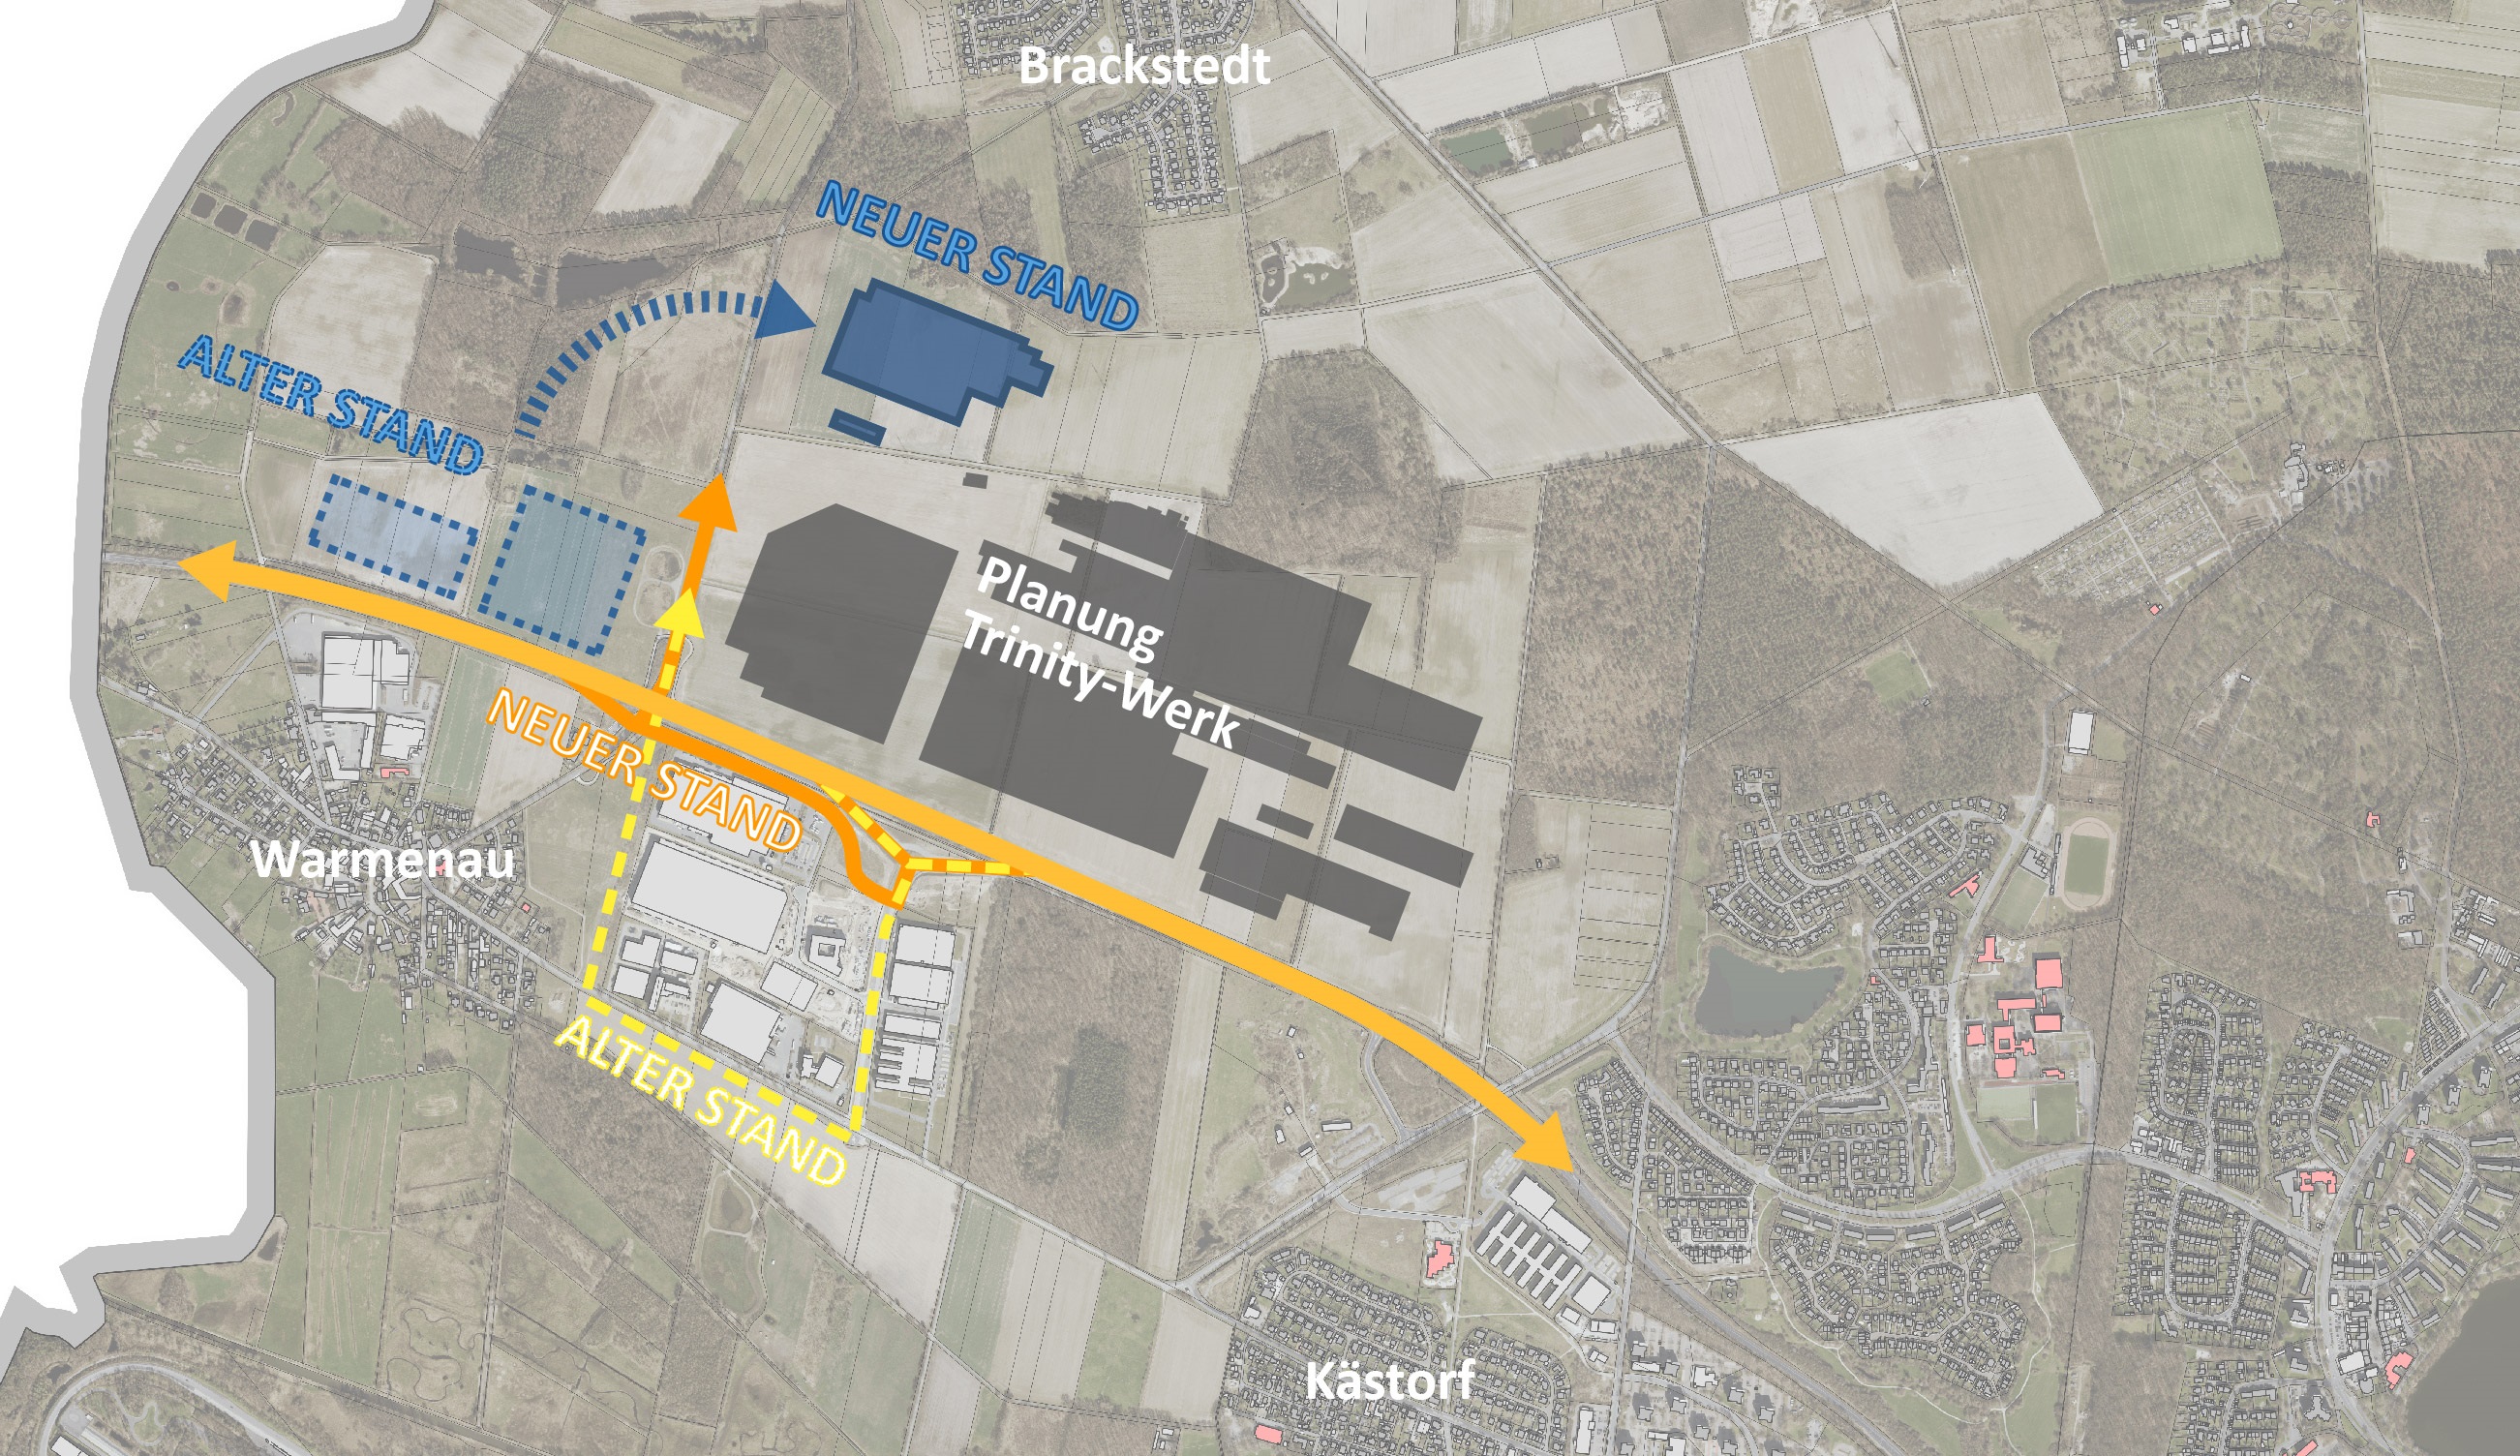 On the graphic you can see the described changes of the plans in relation to the Supplier Park (blue) and the traffic routing (yellow/orange).